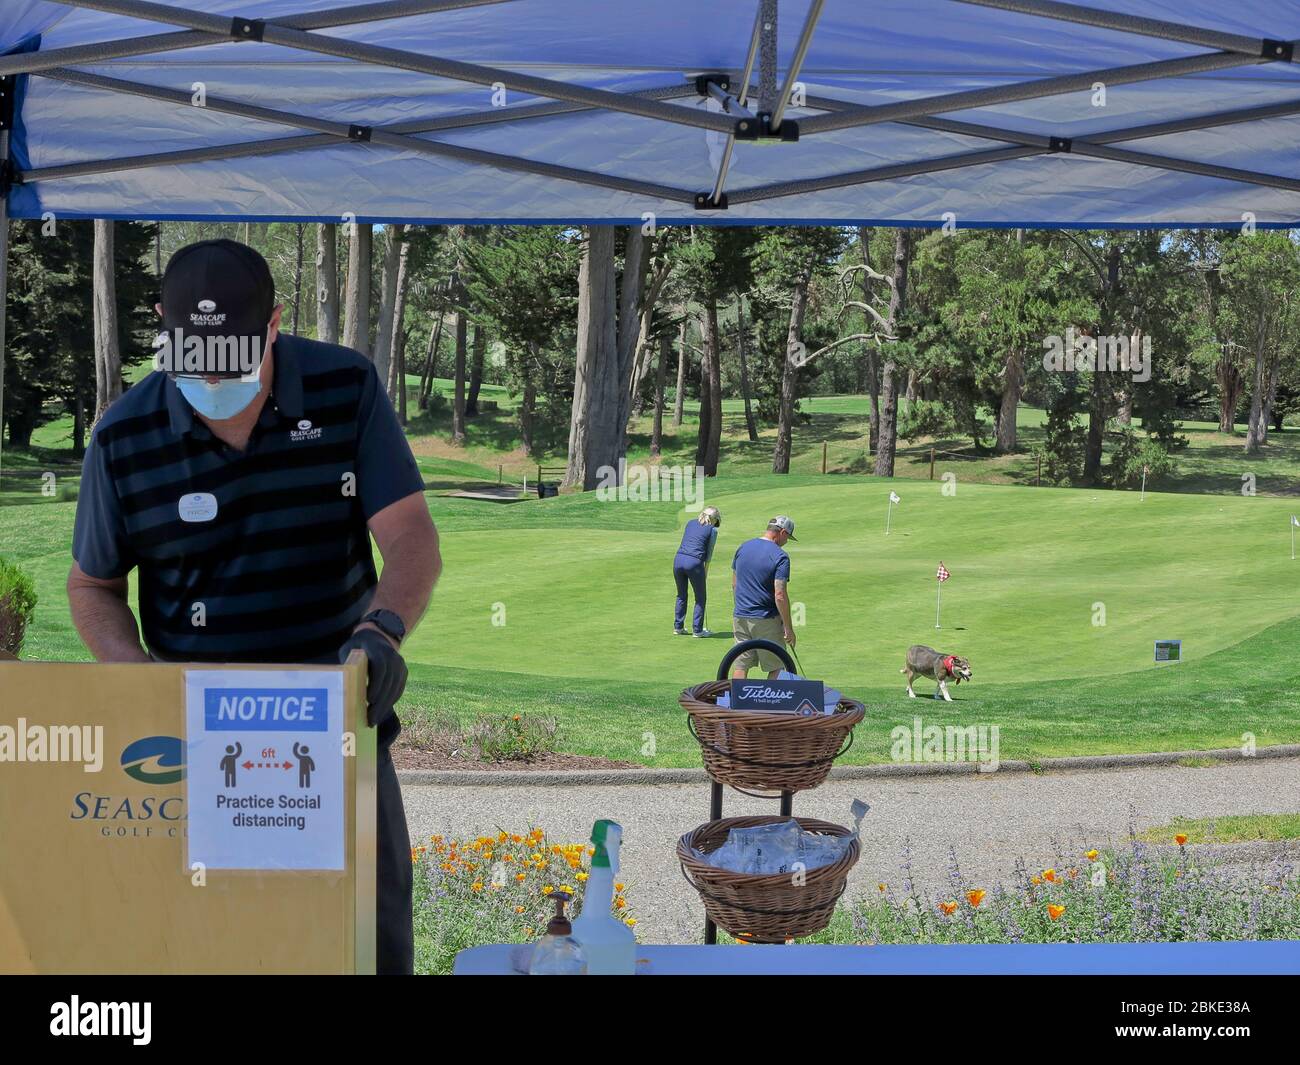 Santa Cuz, CA, USA. 3rd May, 2020. Golf re-starts in California before restrictions are totally lifted post Coronavirus pandemic. Golfers must stay 6 feet apart and play in two balls, no cart sharing and no picking balls out of the hole. Credit: Motofoto/Alamy Live News Stock Photo